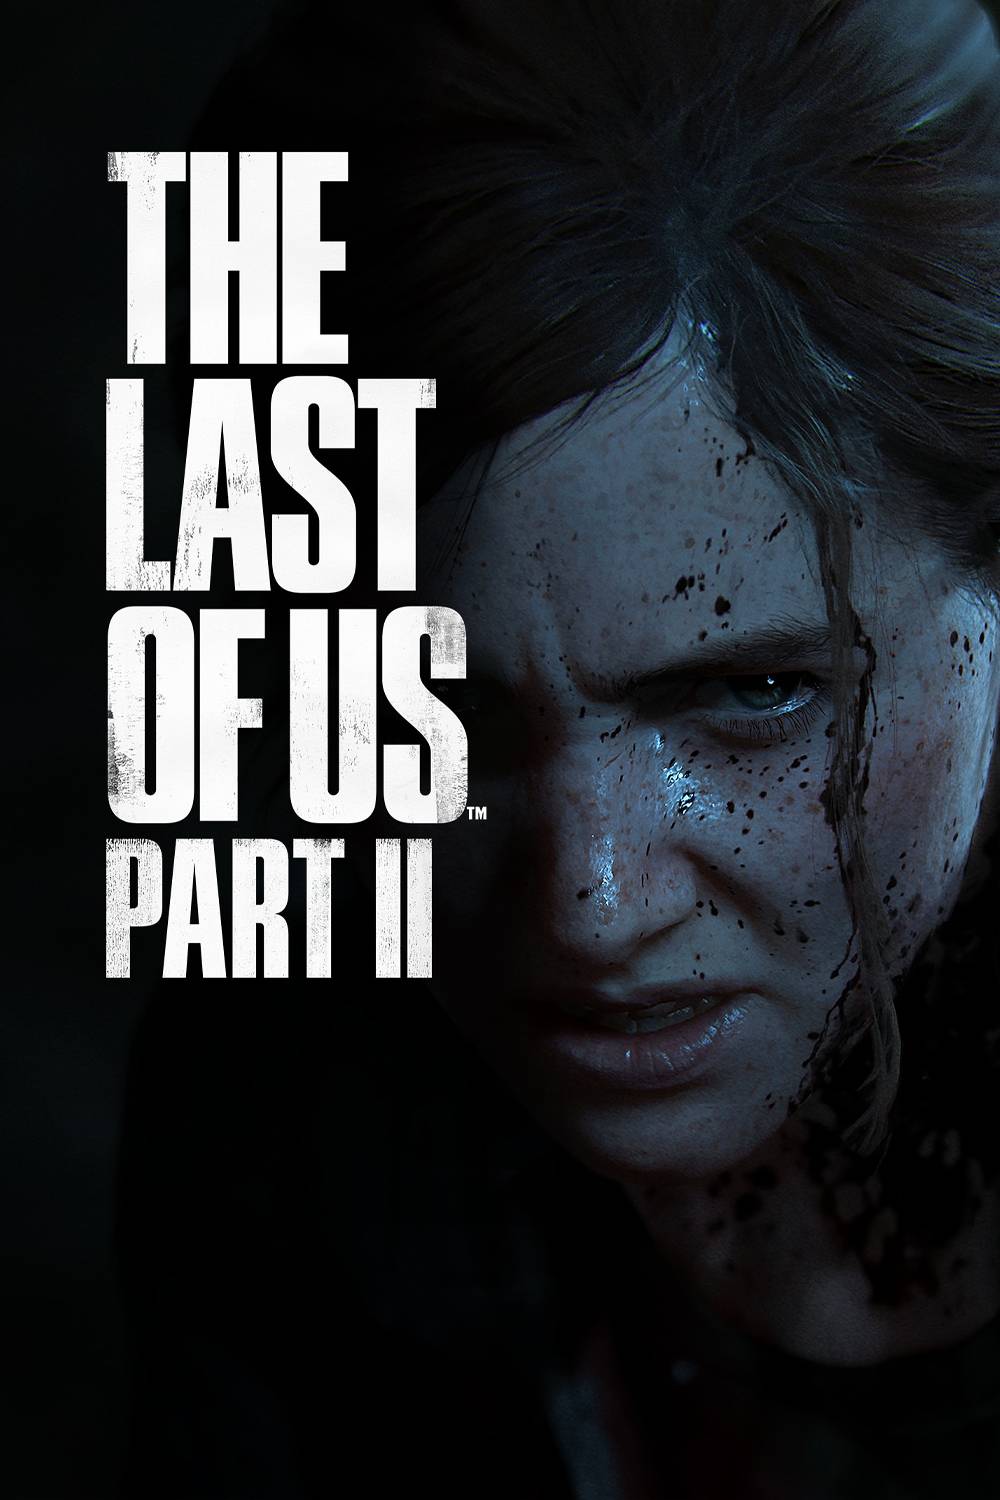 The Last of Us 2 Player Spots Interesting Ellie Detail